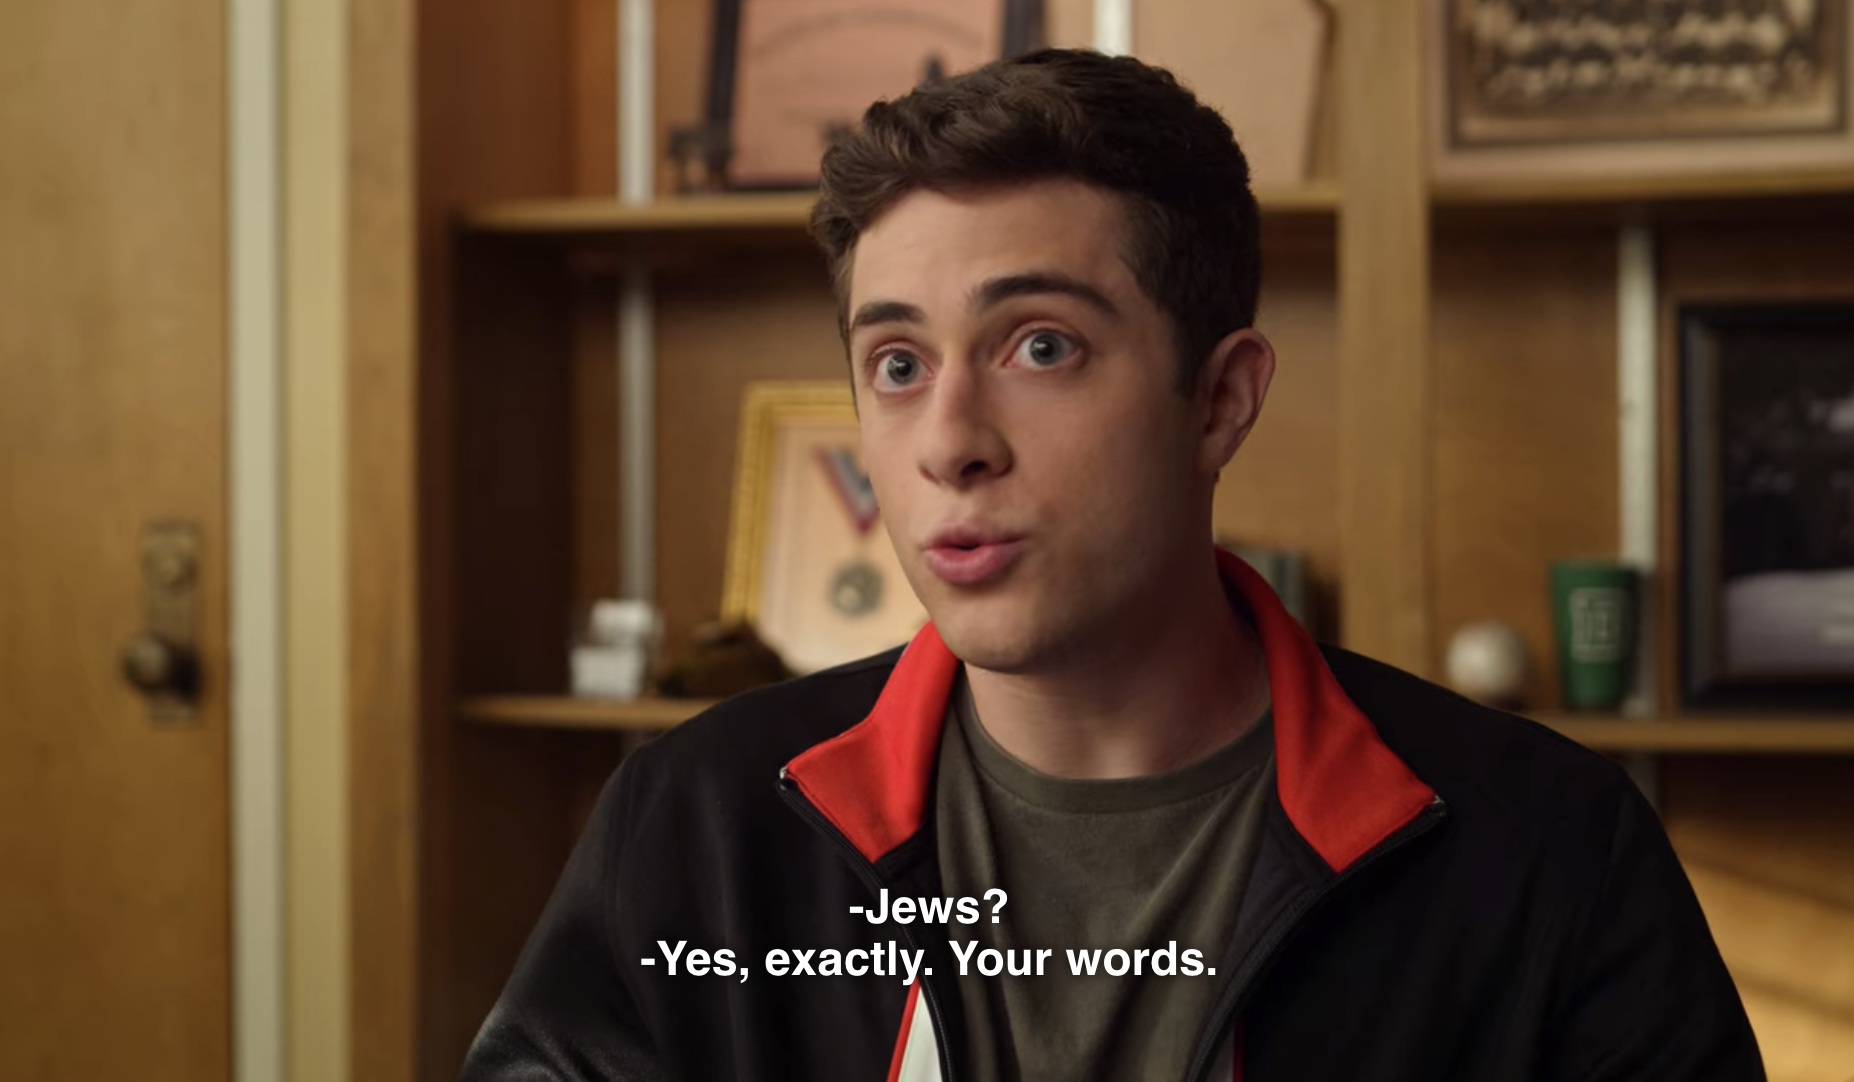 Ben: Jews? Principal Grubbs: Yes, exactly. Your words.